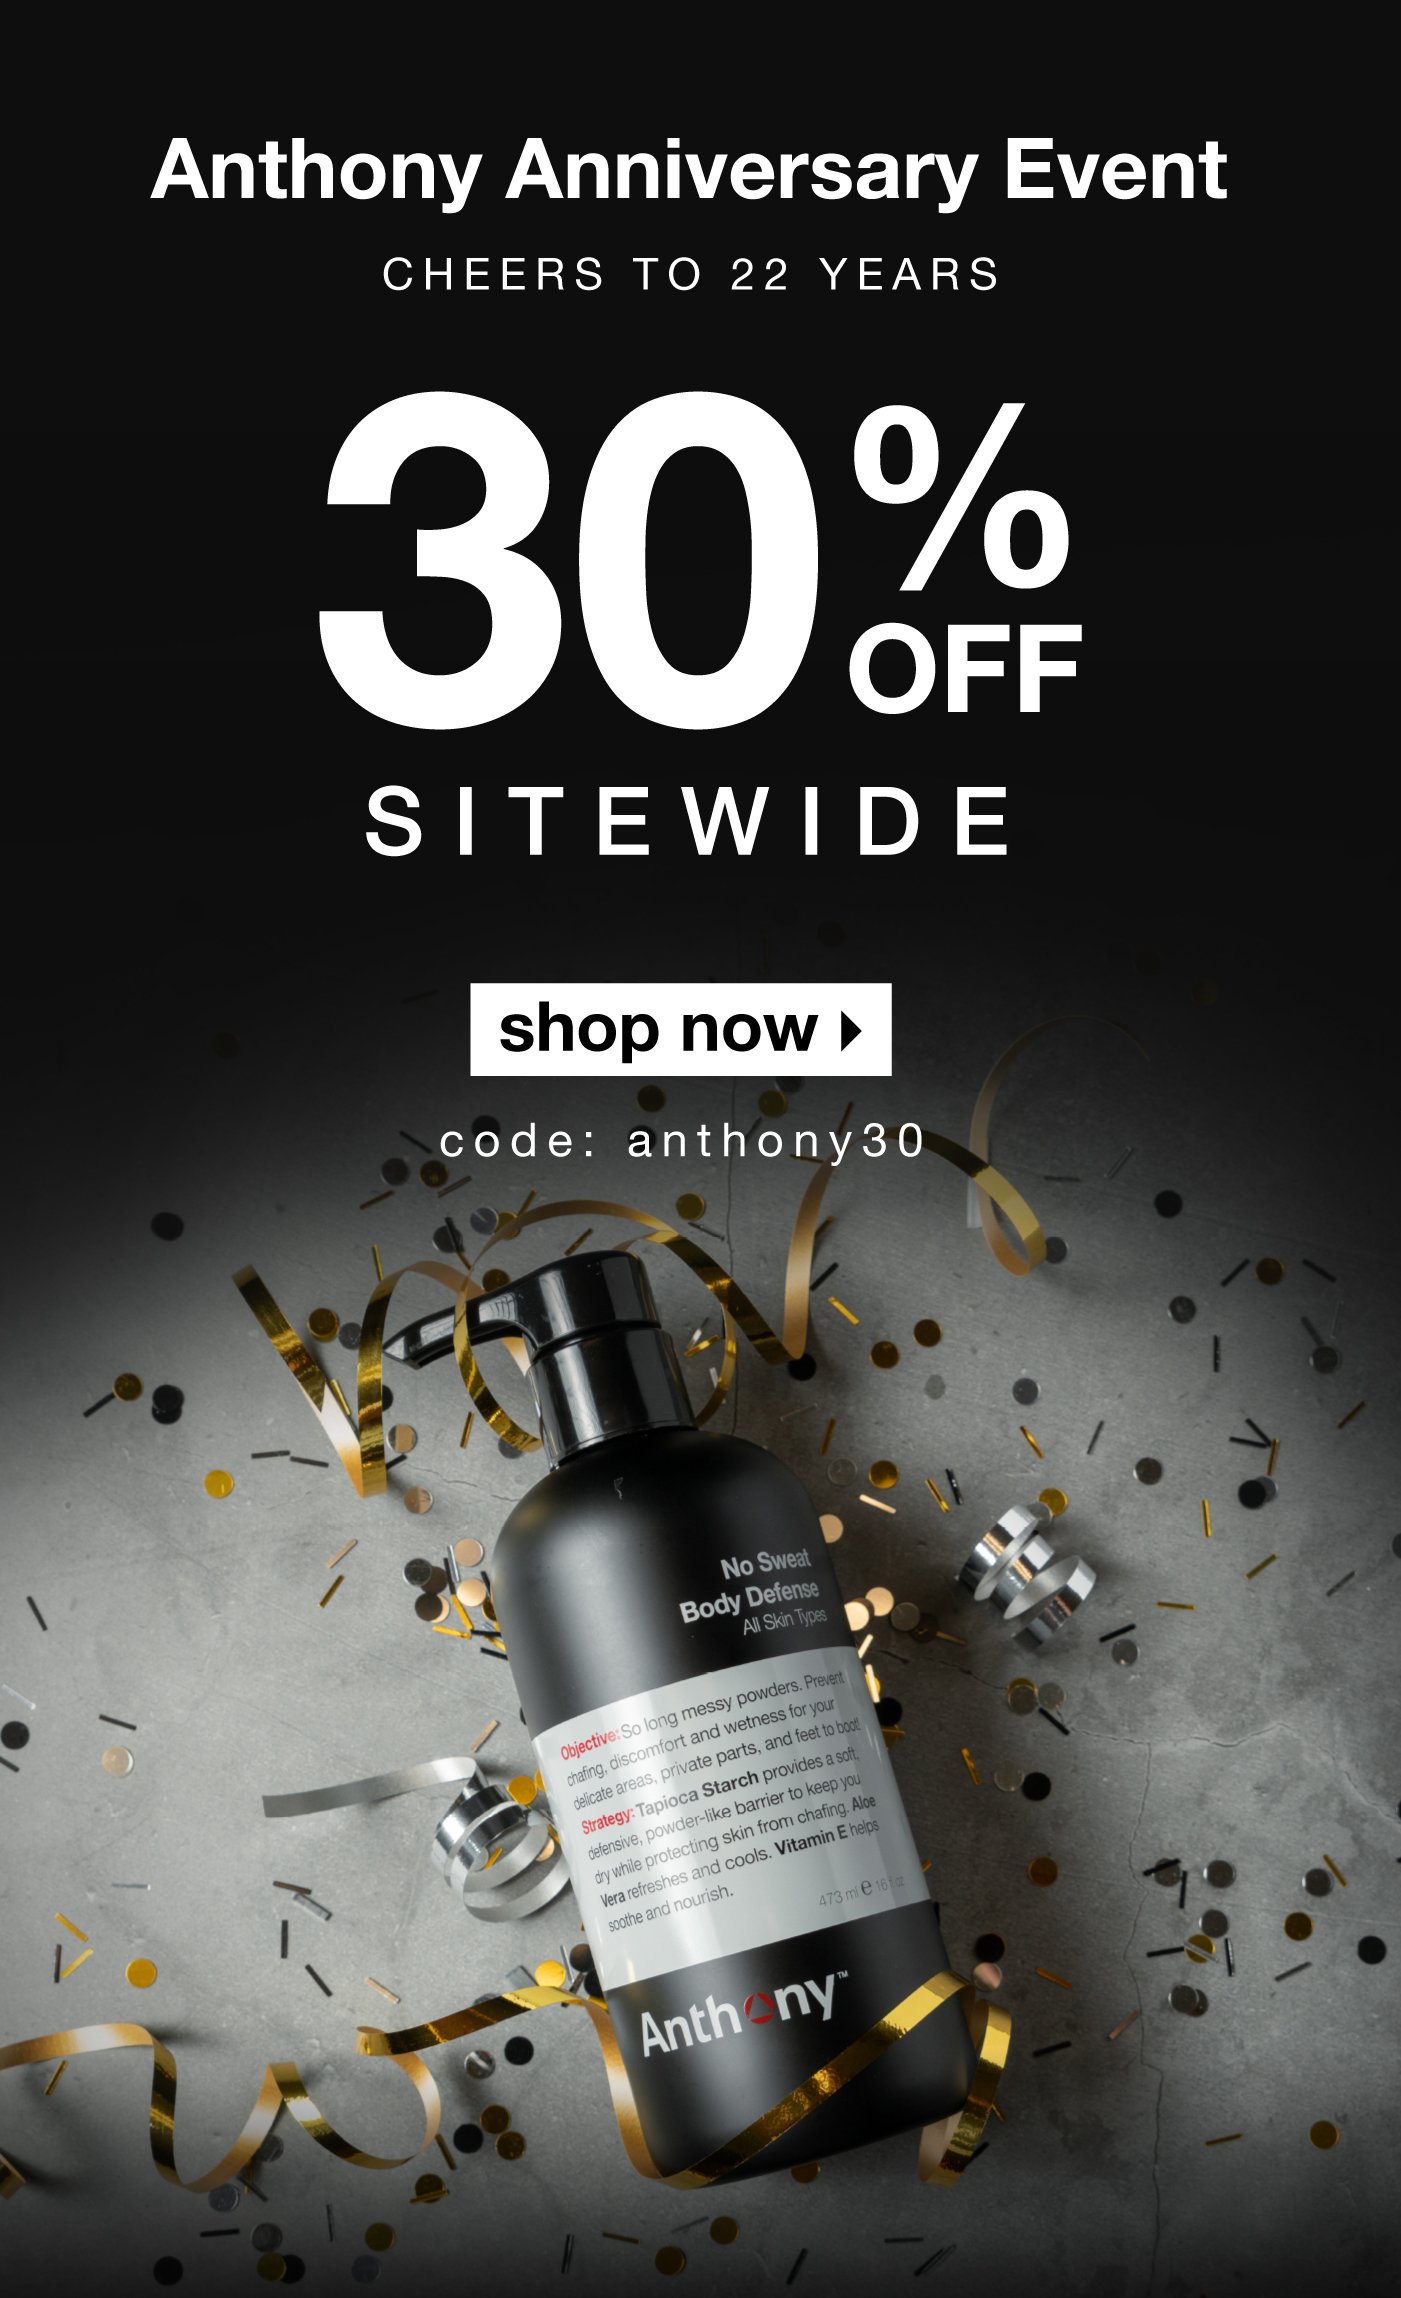 Anthony Anniversary Event- Cheers to 22 Years! 30% off sitewide with code ANTHONY30